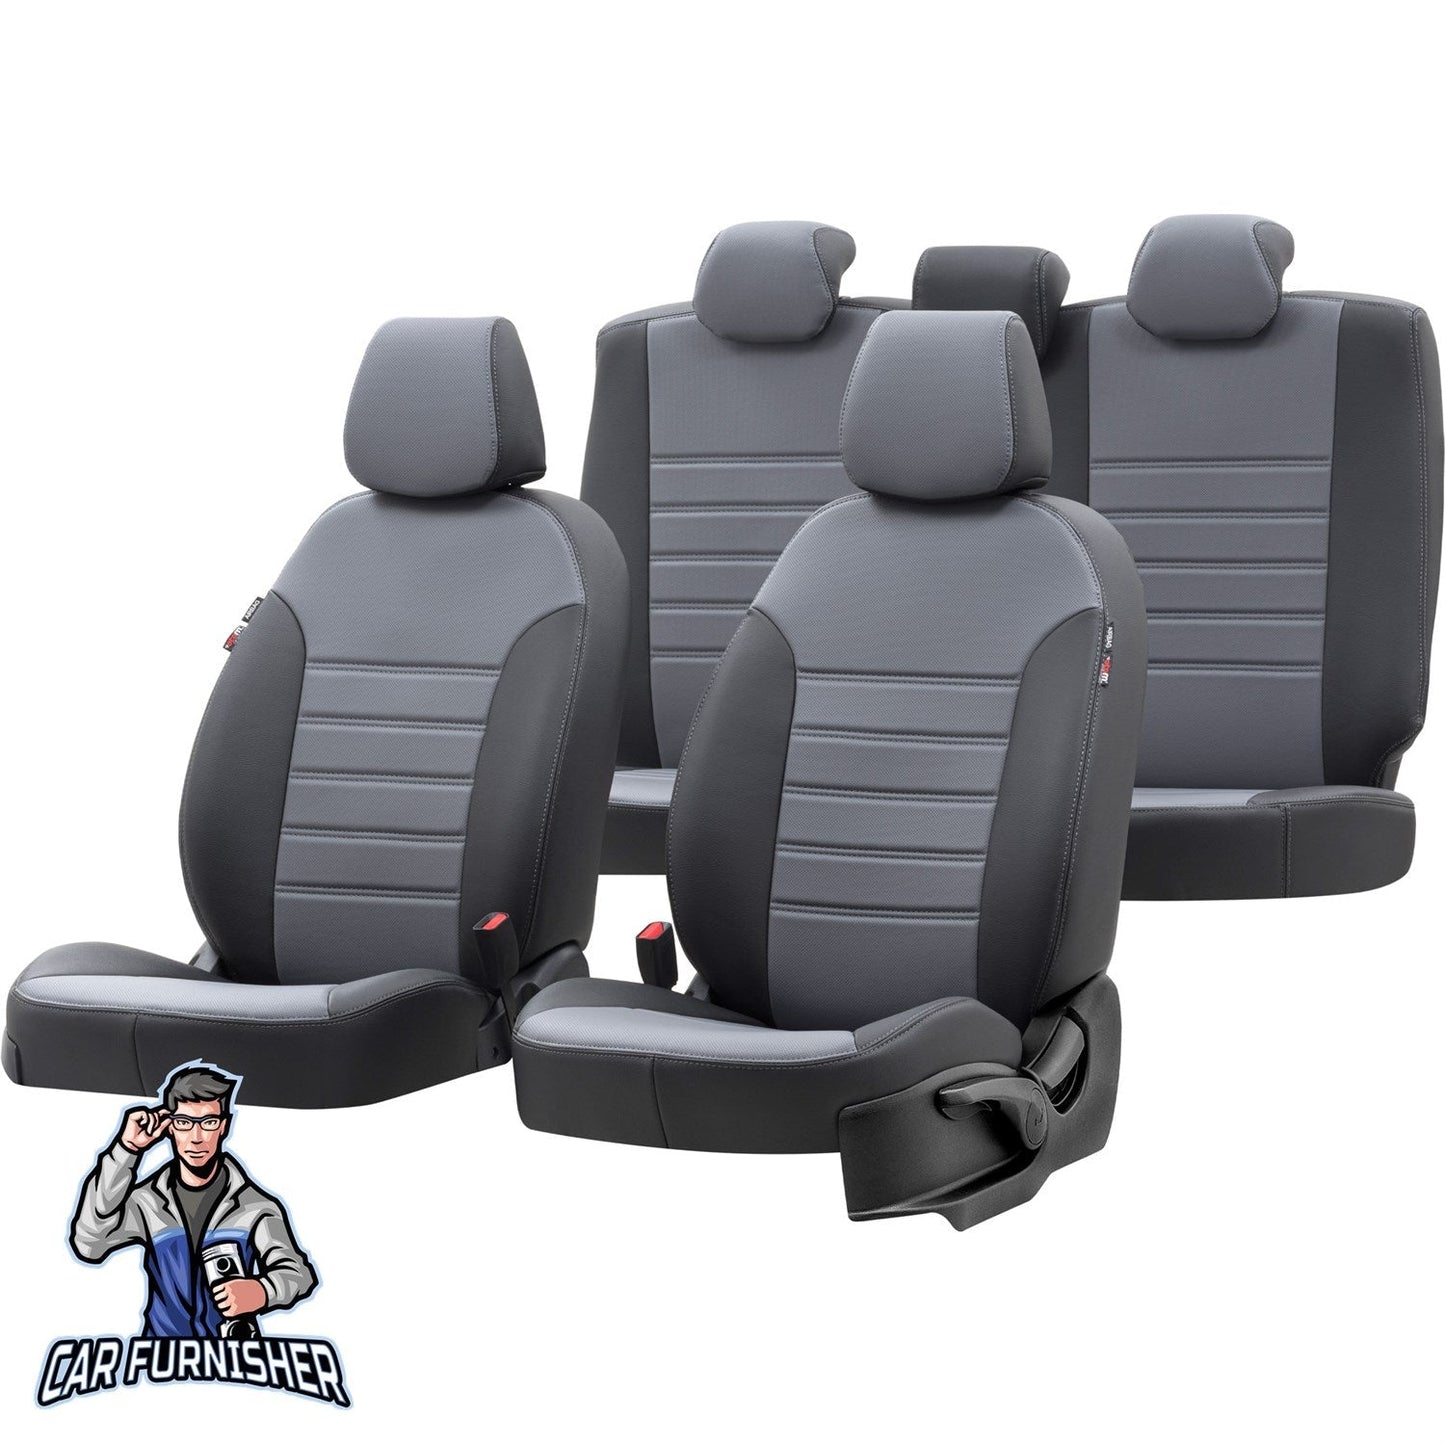 Skoda Fabia Seat Covers Istanbul Leather Design Smoked Black Leather